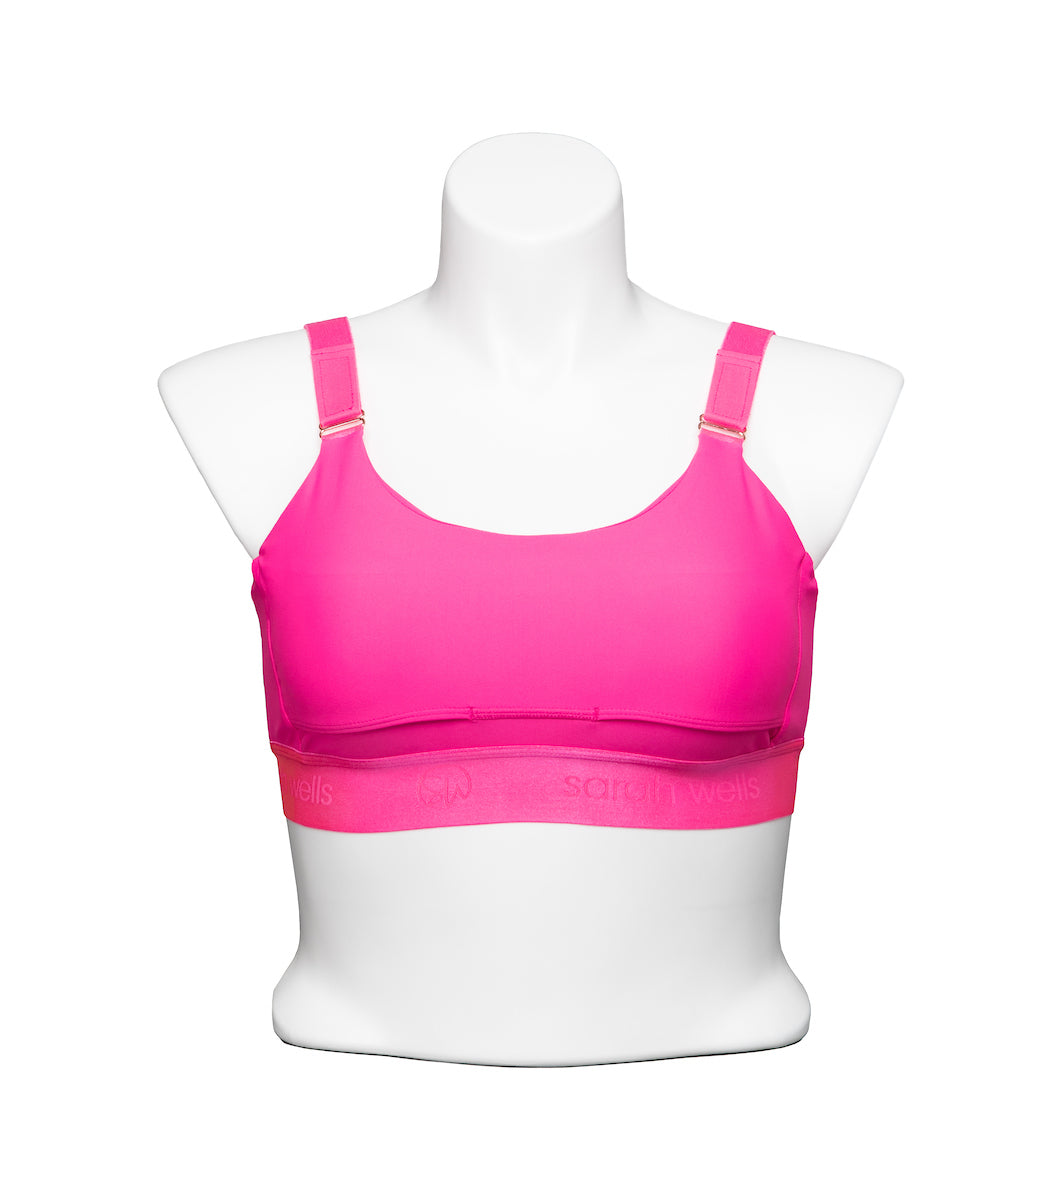 Simple Wishes Adjustable Hands Free Pumping Bra - Soft Pink – The Wild